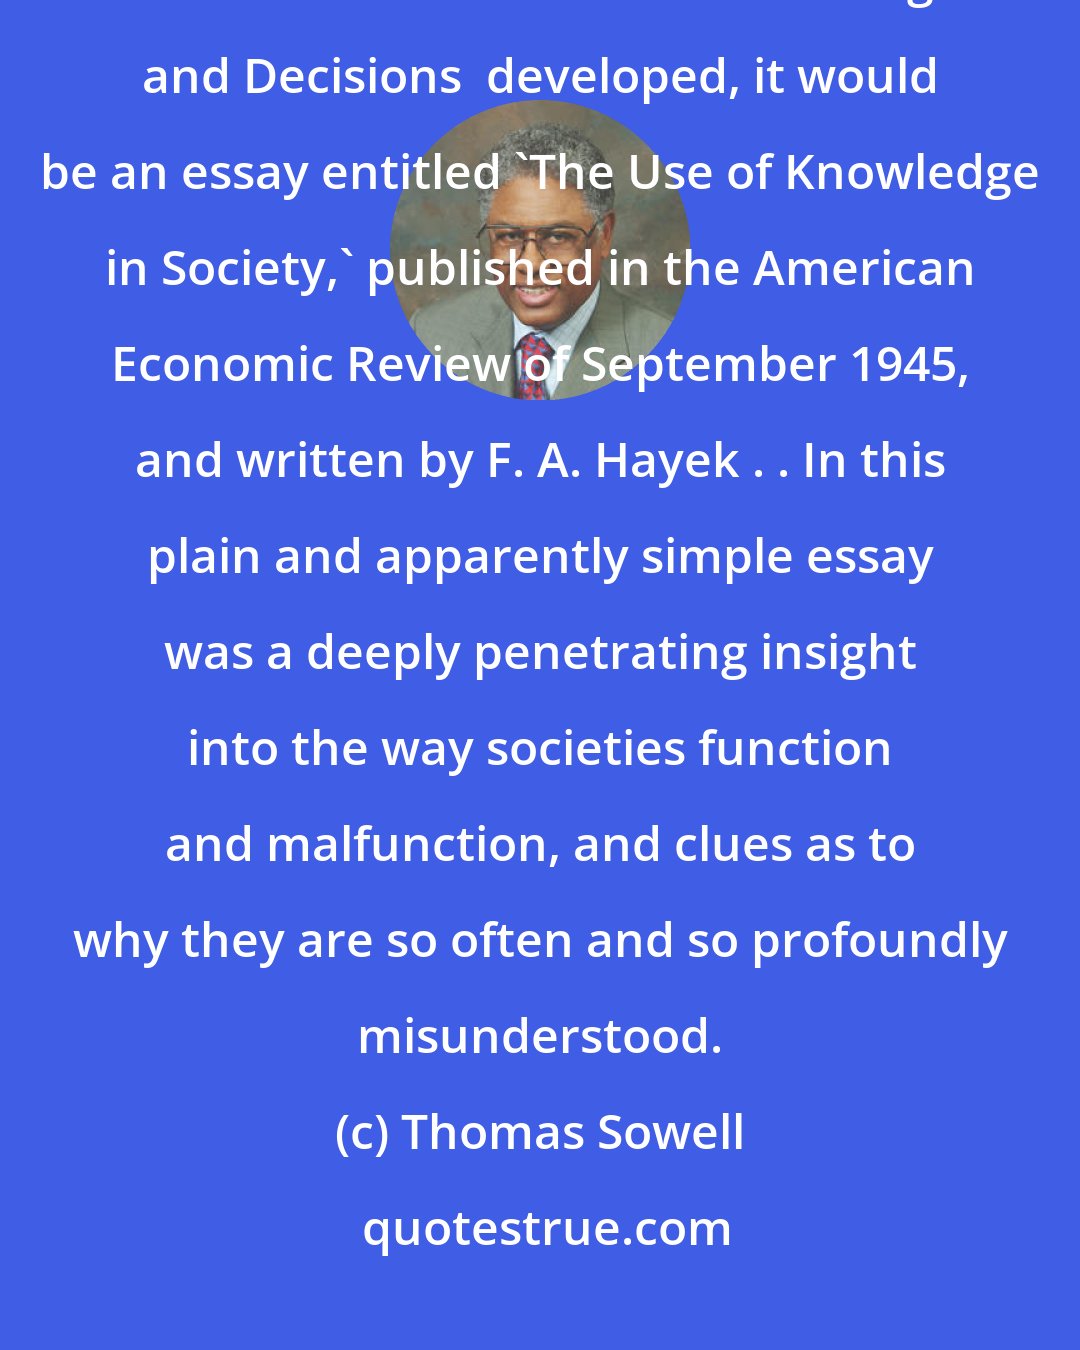 Thomas Sowell: If one writing contributed more than any other to the framework in which this work  Sowell's Knowledge and Decisions  developed, it would be an essay entitled 'The Use of Knowledge in Society,' published in the American Economic Review of September 1945, and written by F. A. Hayek . . In this plain and apparently simple essay was a deeply penetrating insight into the way societies function and malfunction, and clues as to why they are so often and so profoundly misunderstood.